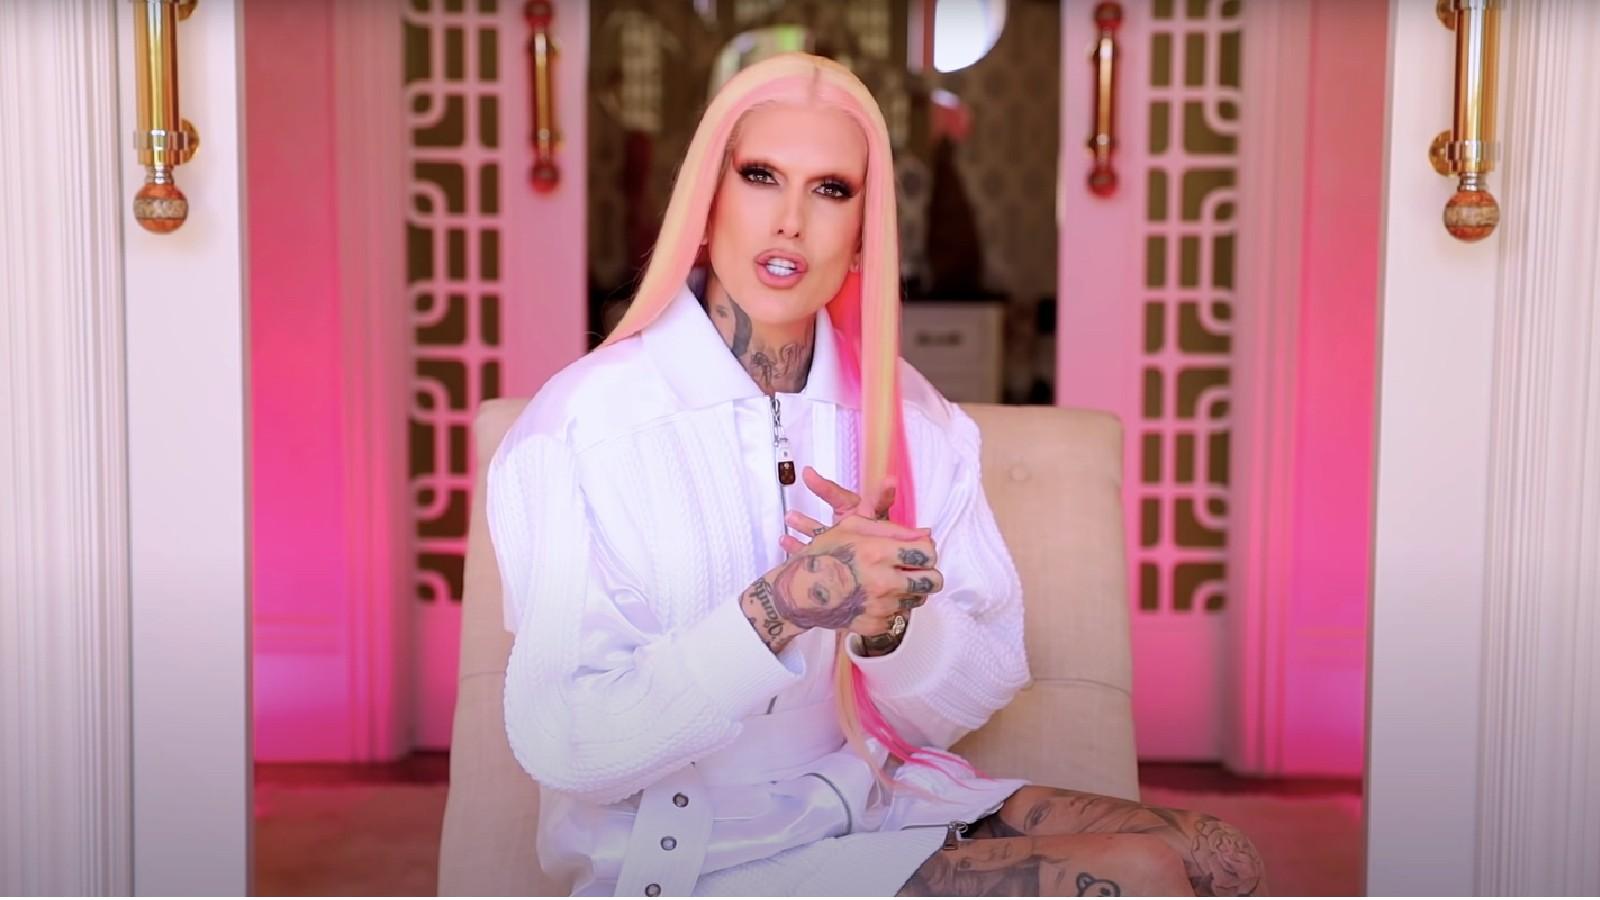 Video featuring Jeffree Star